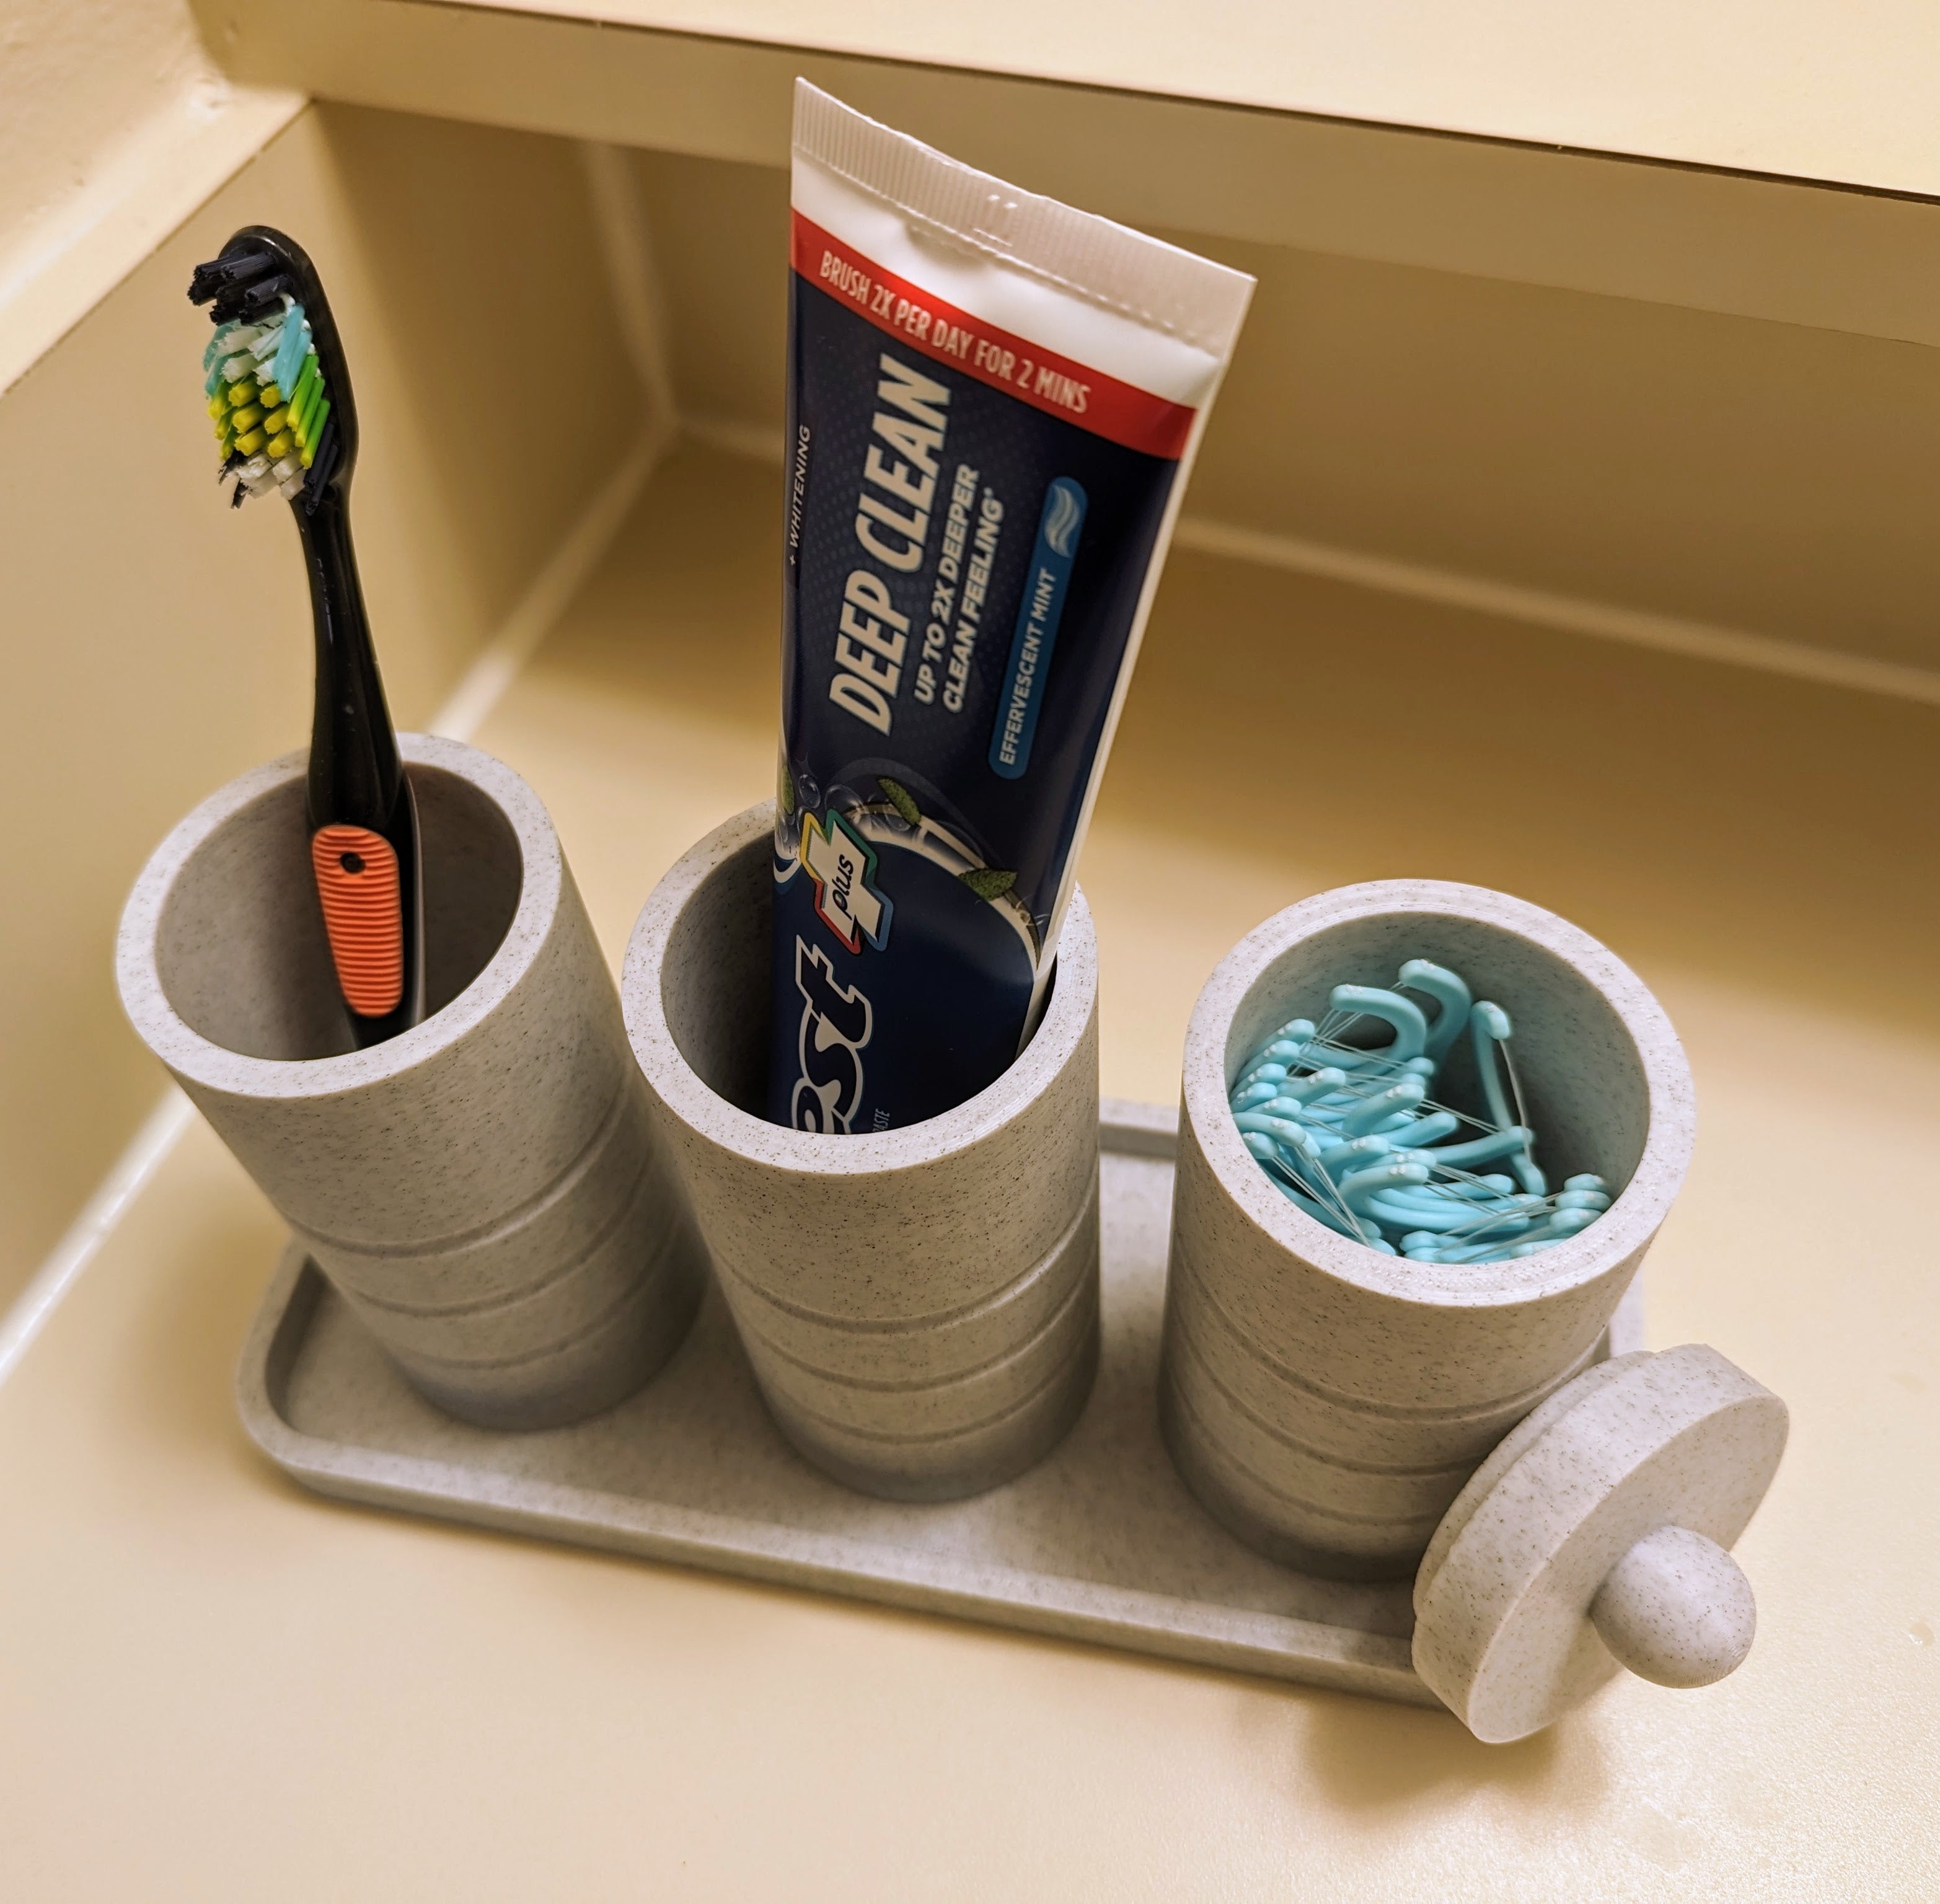 Bathroom Organiser for Toothbrushes and Q-tips